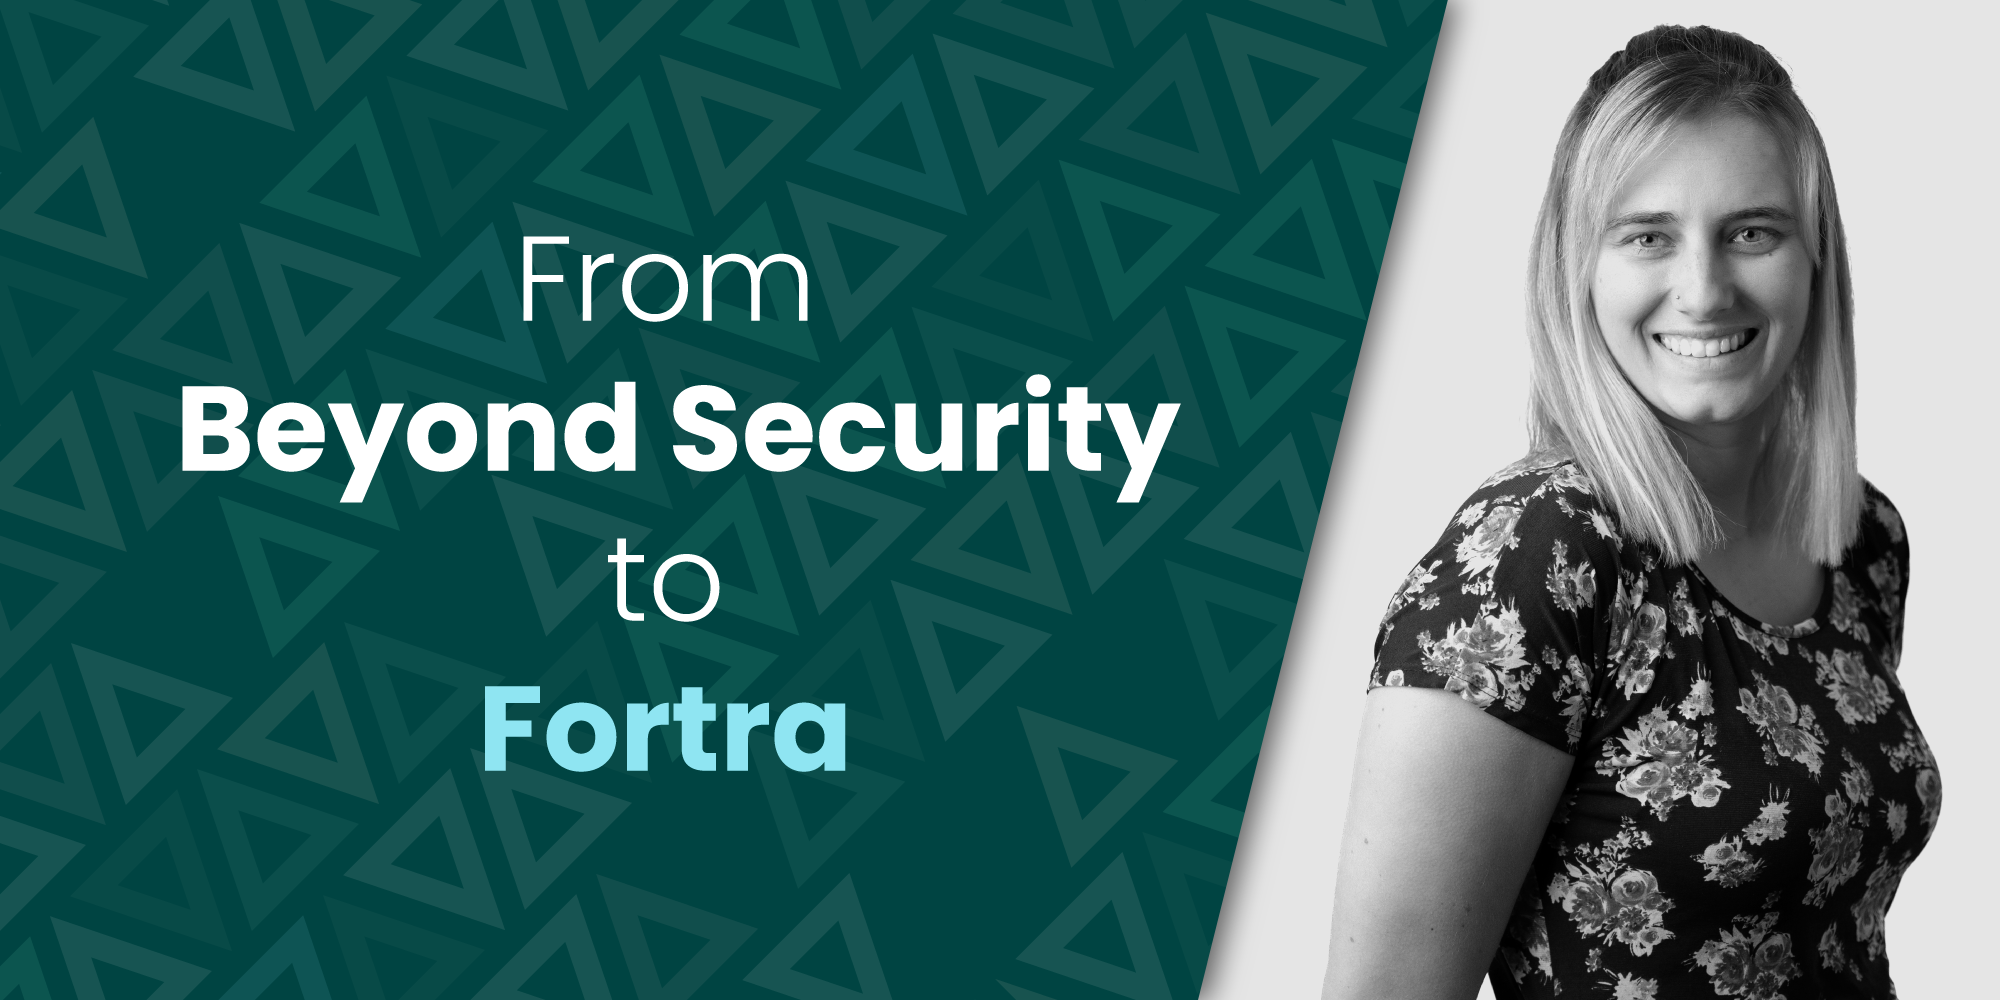 Fortra-acquisition-series-beyond-security-jasmine-zaker